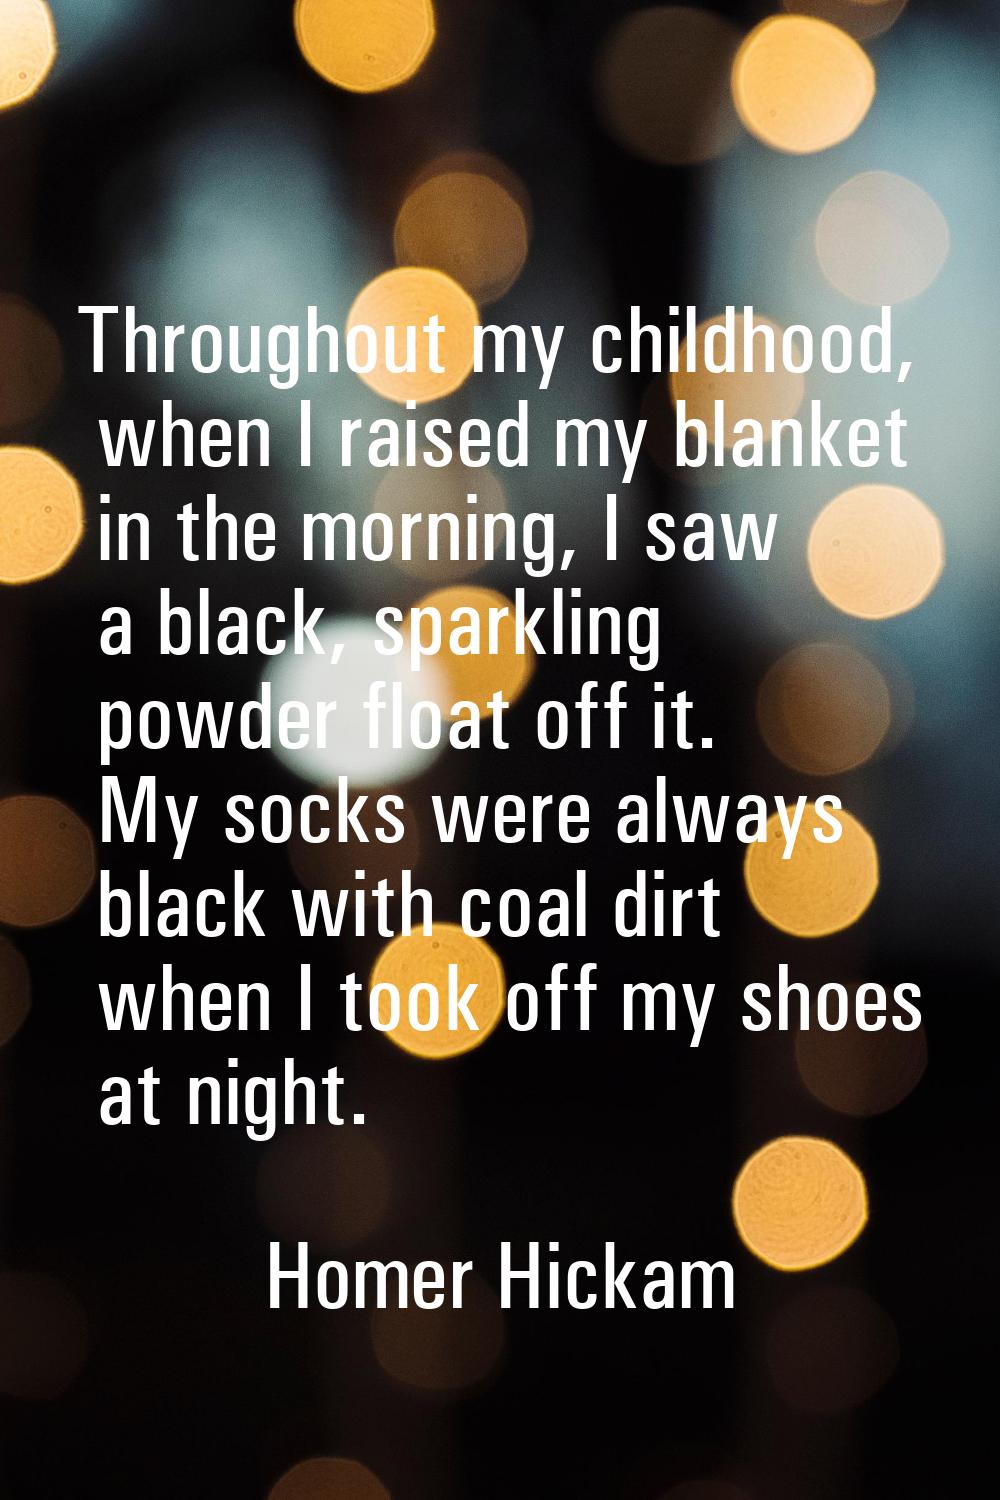 Throughout my childhood, when I raised my blanket in the morning, I saw a black, sparkling powder f